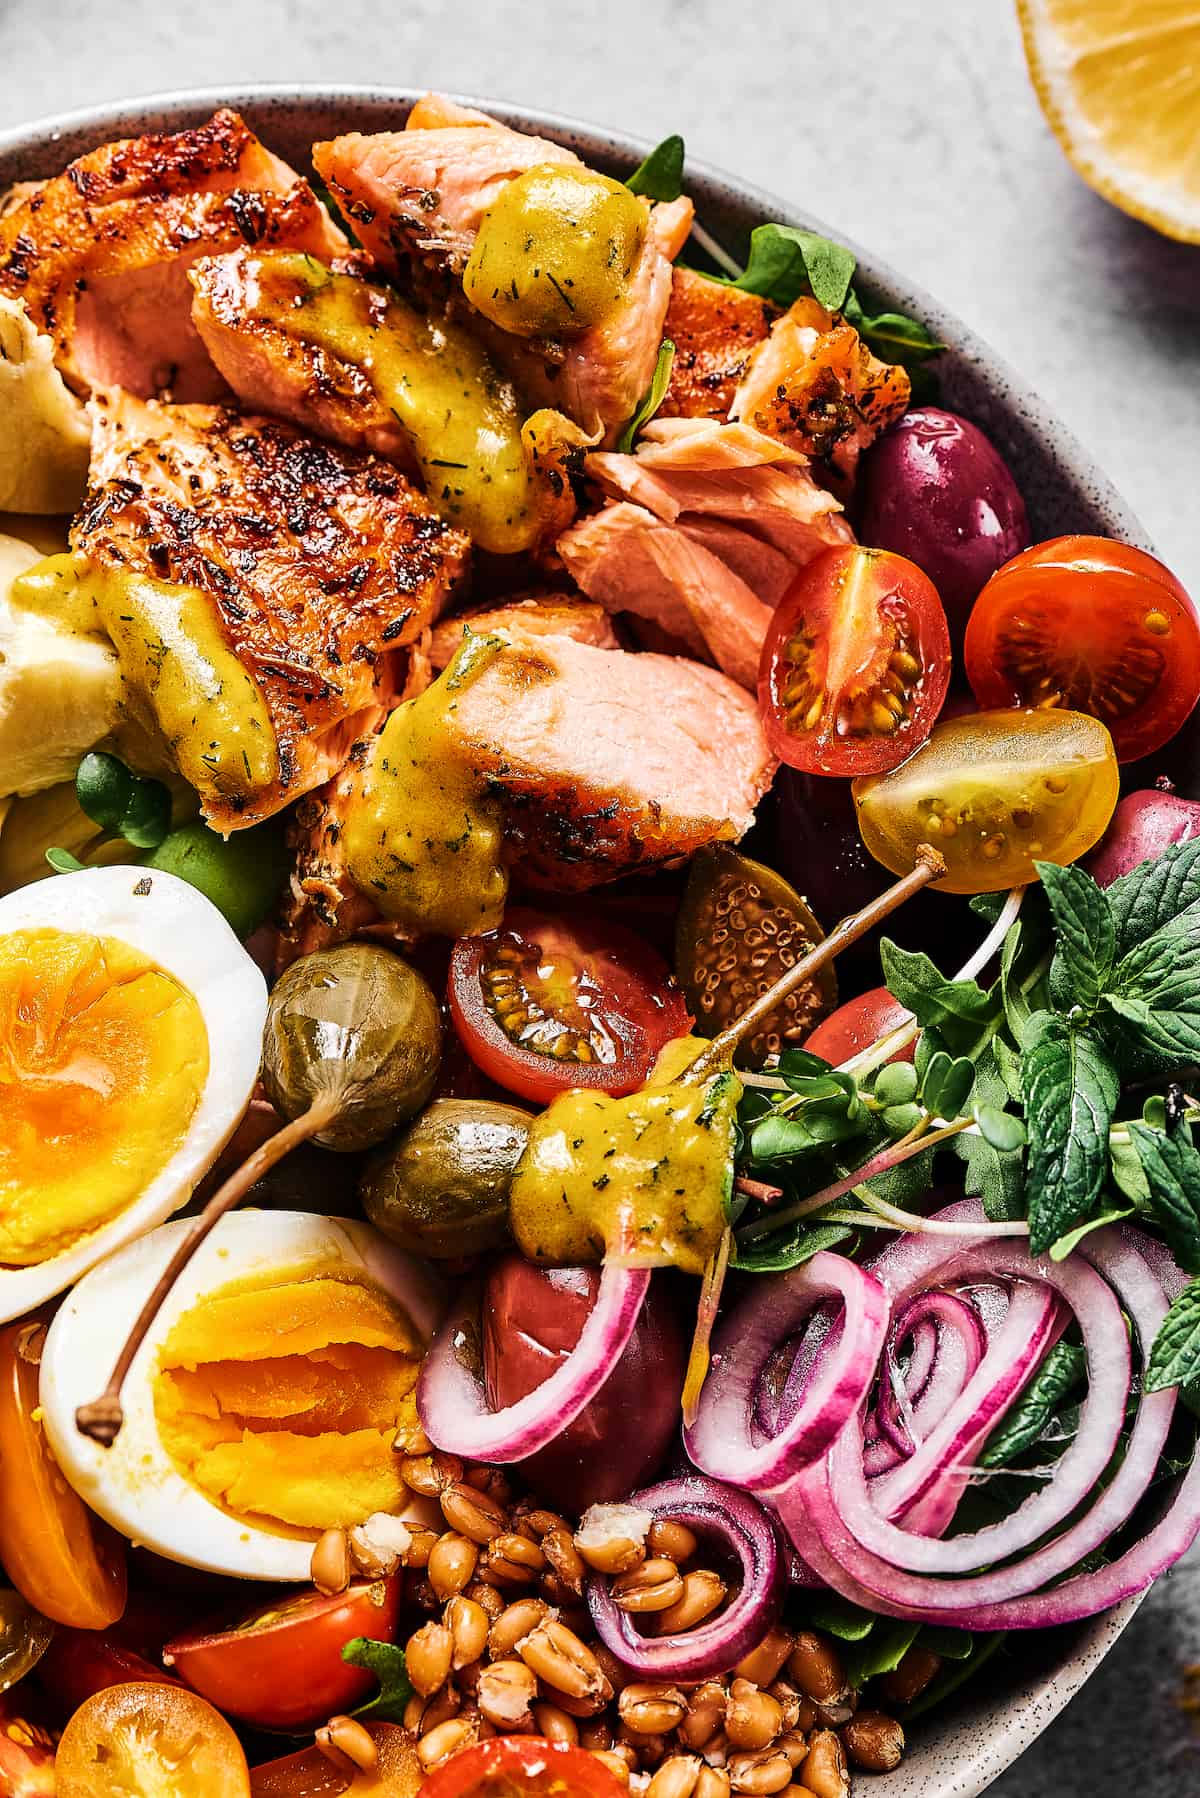 A main-course salad with grilled salmon, tomatoes, arugula, hard-boiled eggs, pickled onions, and more.